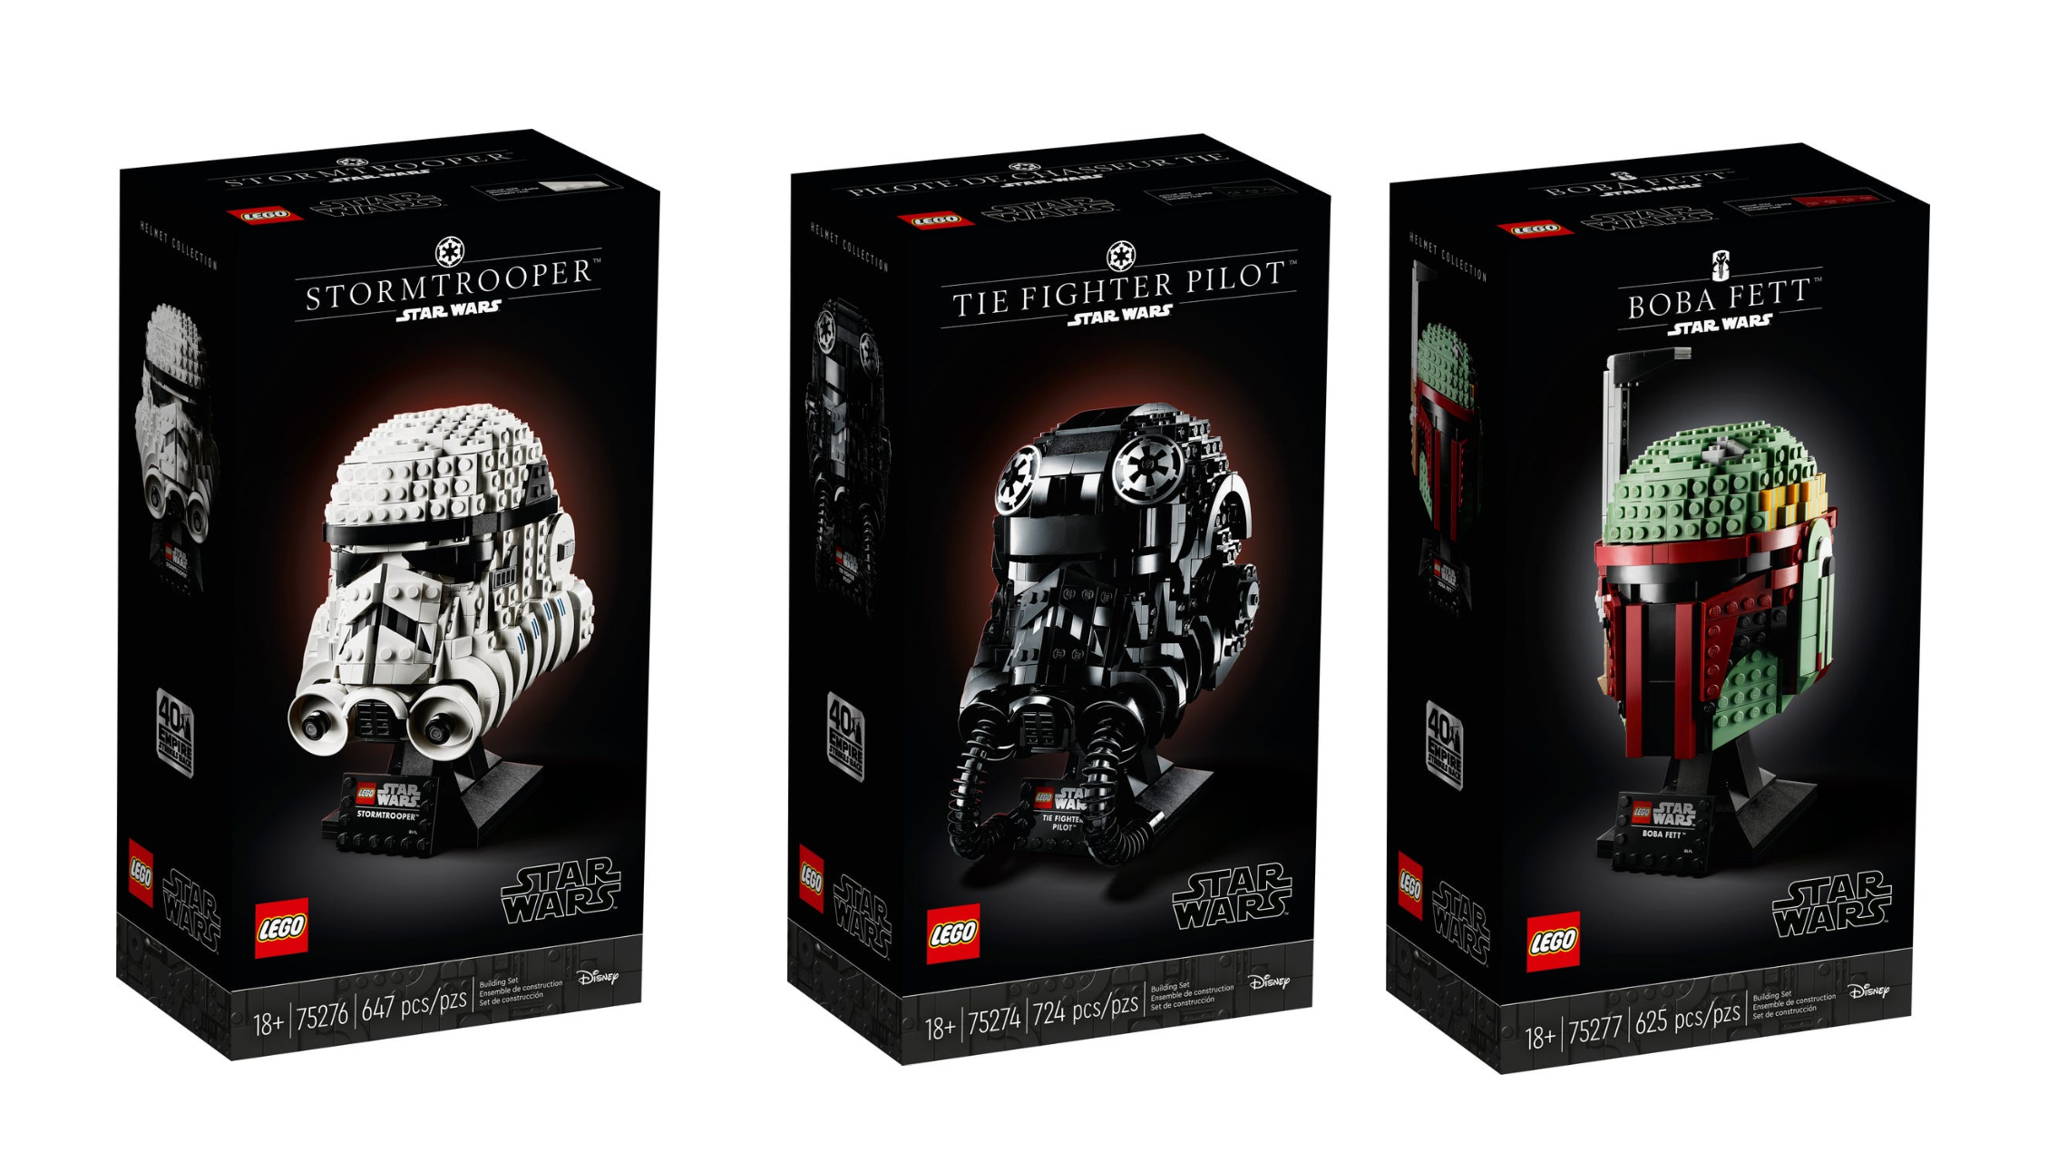 Star Wars example #55: LEGO Gets It, Designs New Star Wars Kits And Packaging Aimed At Adults